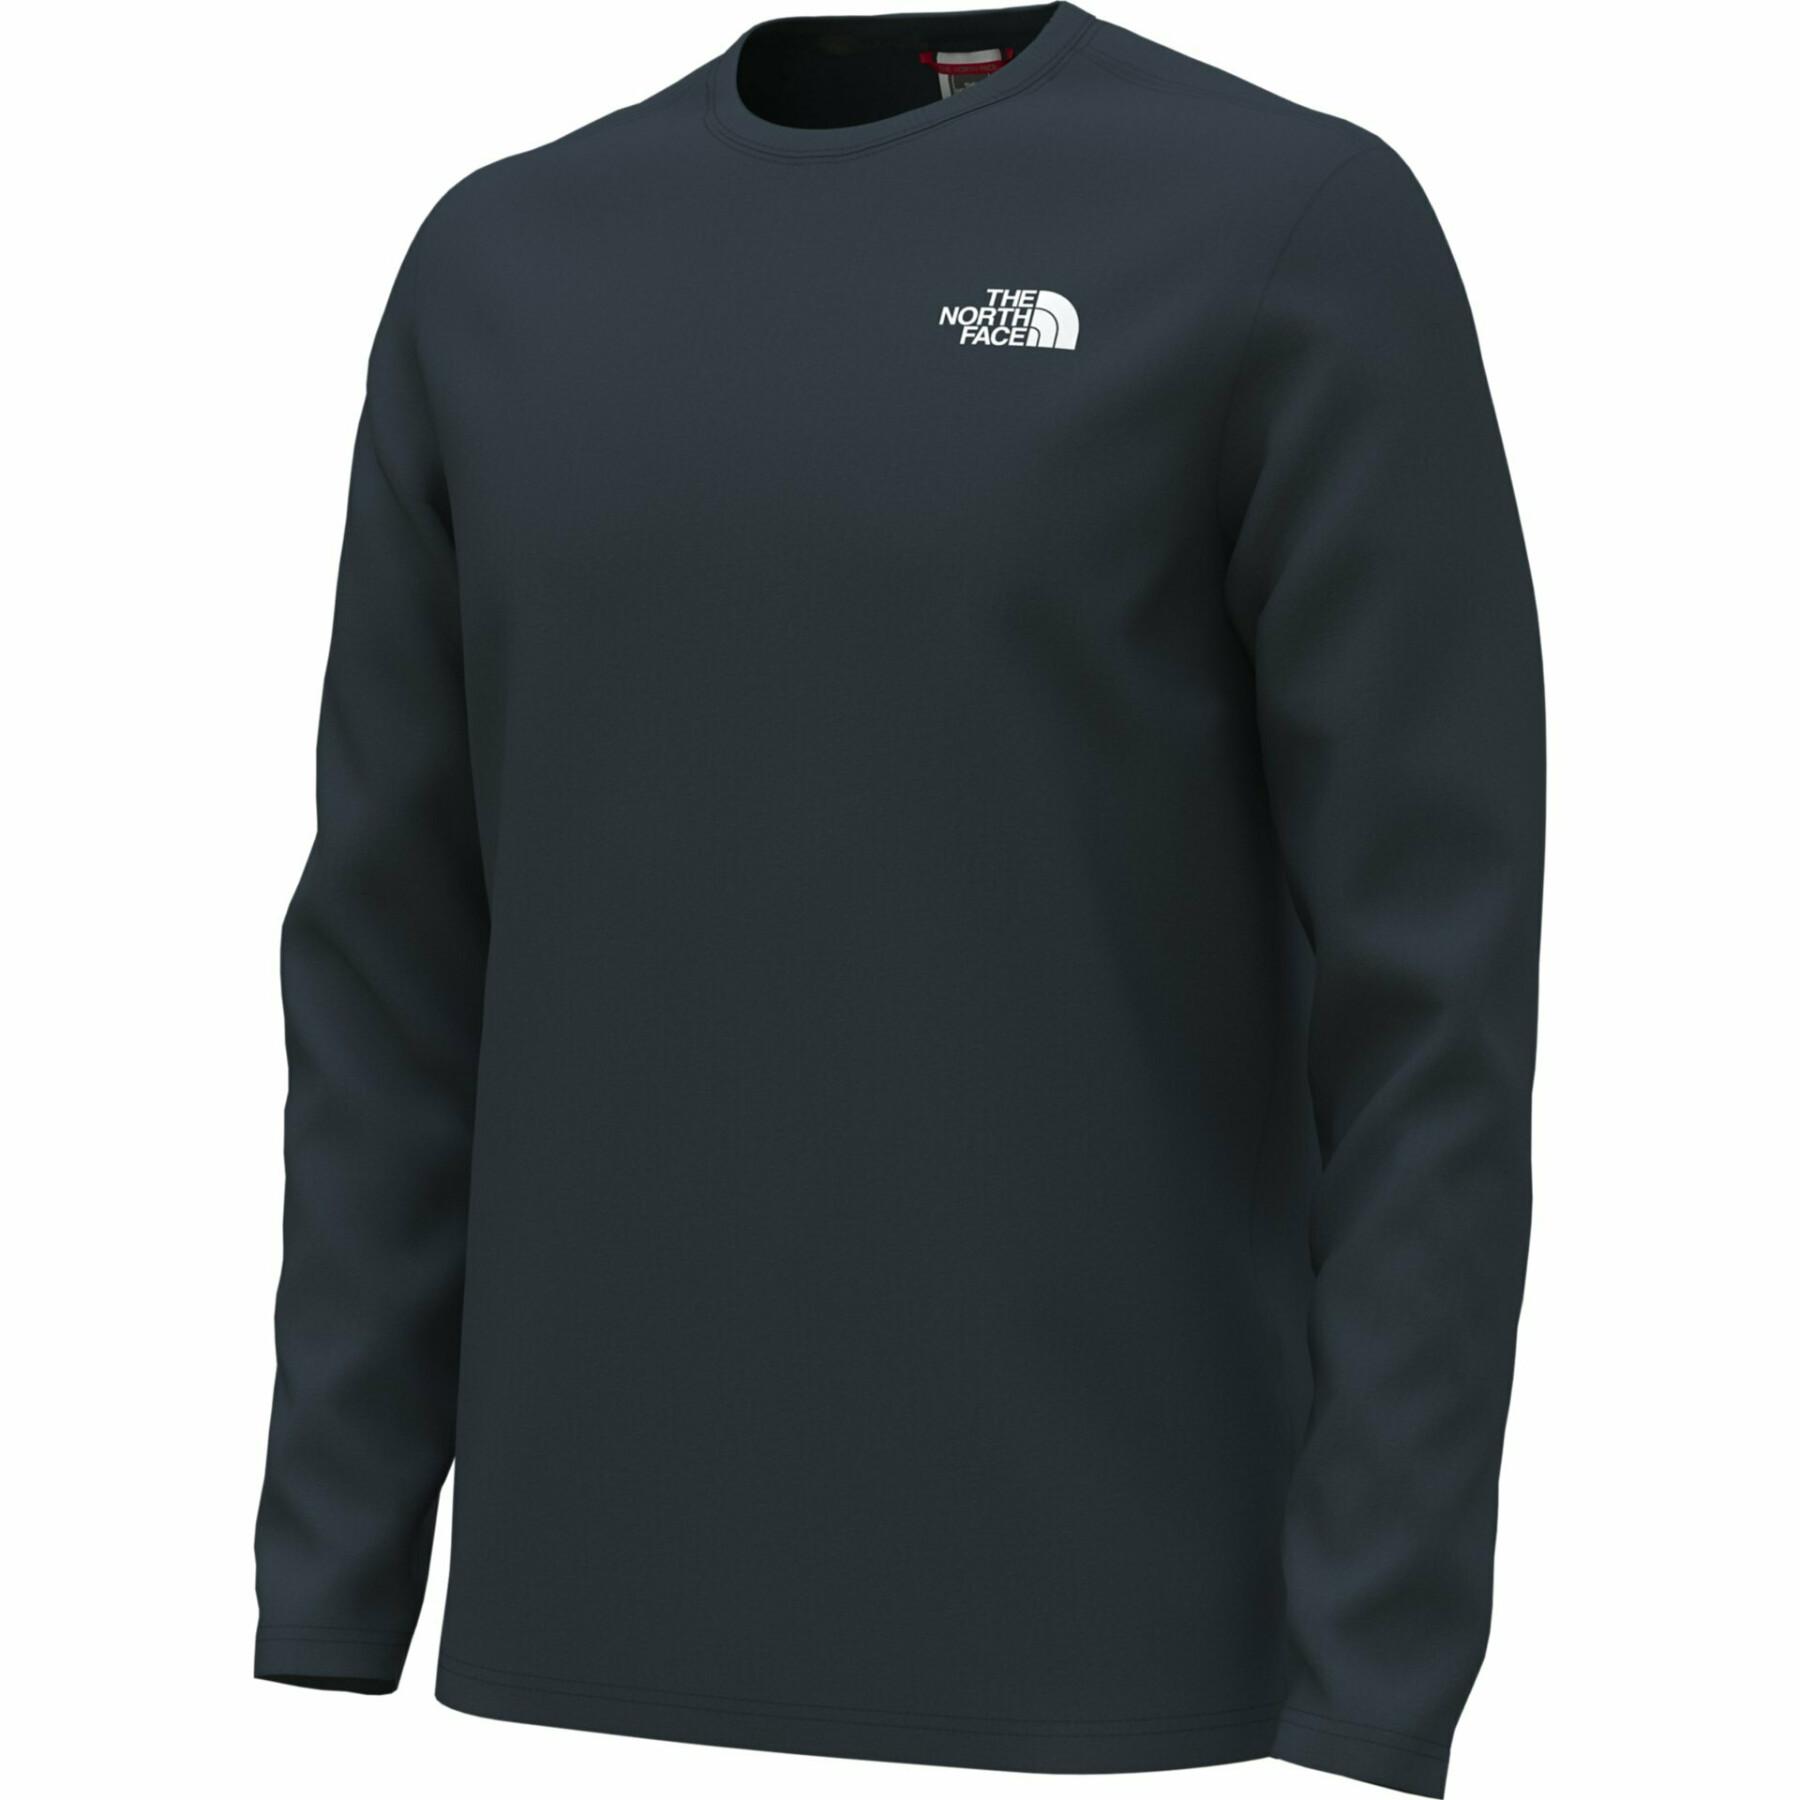 Langarm-T-Shirt The North Face Easy